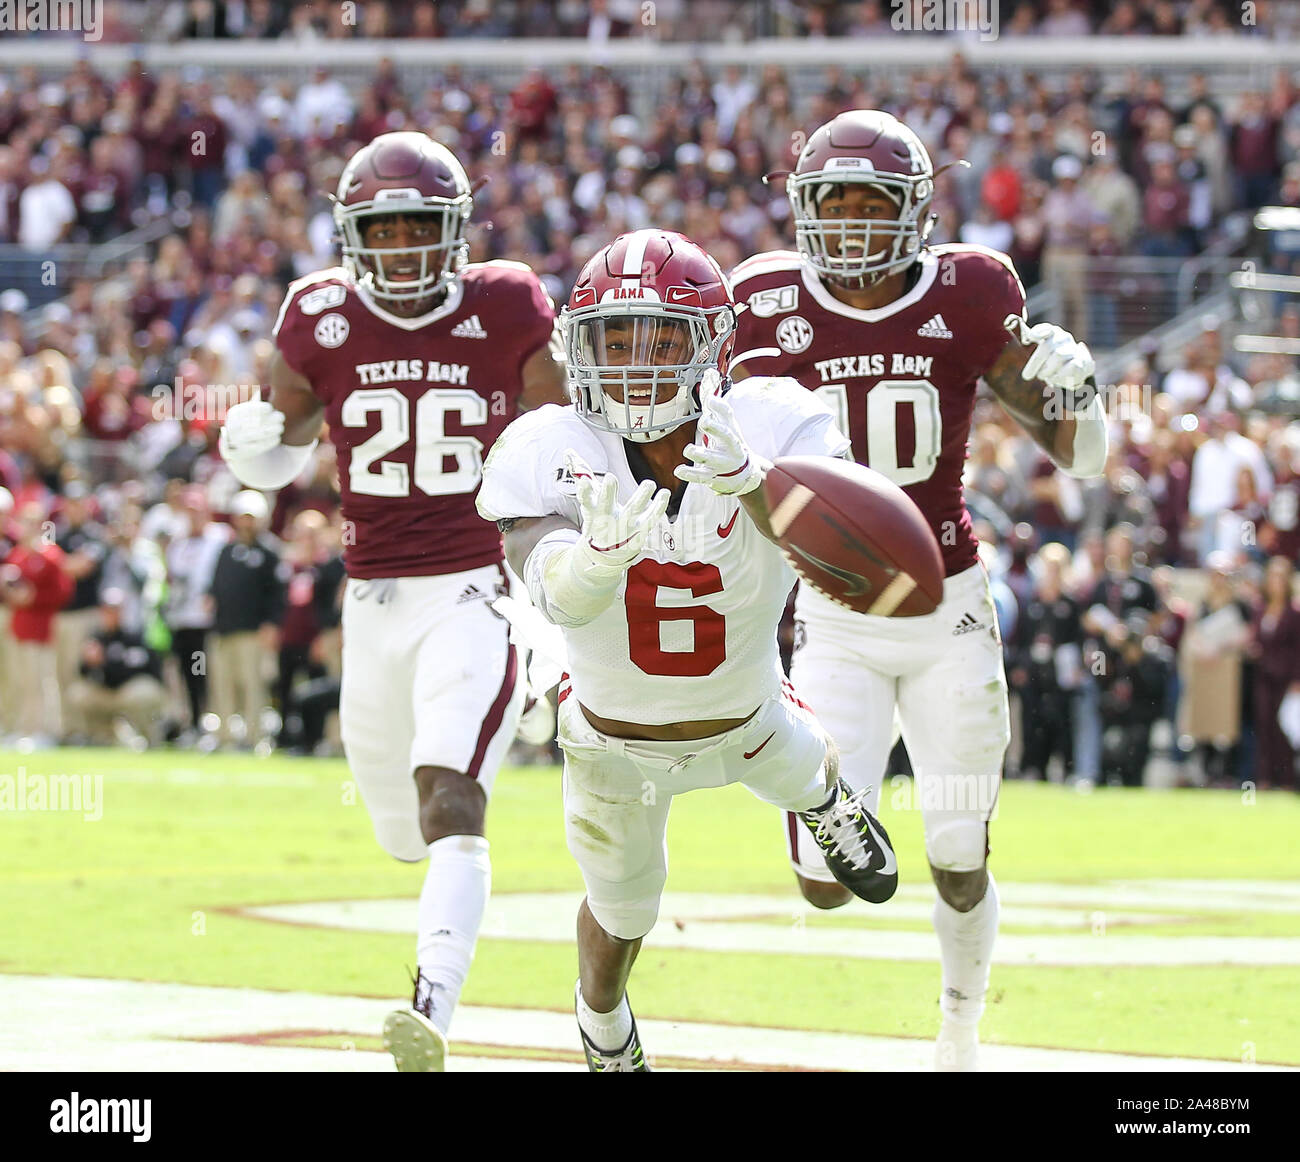 College Station, Texas, USA. 12th Oct, 2019. Alabama Crimson Tide wide receiver DeVonta Smith (6) dives for an out of reach pass in the end zone during an NCAA football game between Texas A&M and Alabama at Kyle Field in College Station, Texas, on Oct. 12, 2019. Credit: Scott Coleman/ZUMA Wire/Alamy Live News Stock Photo